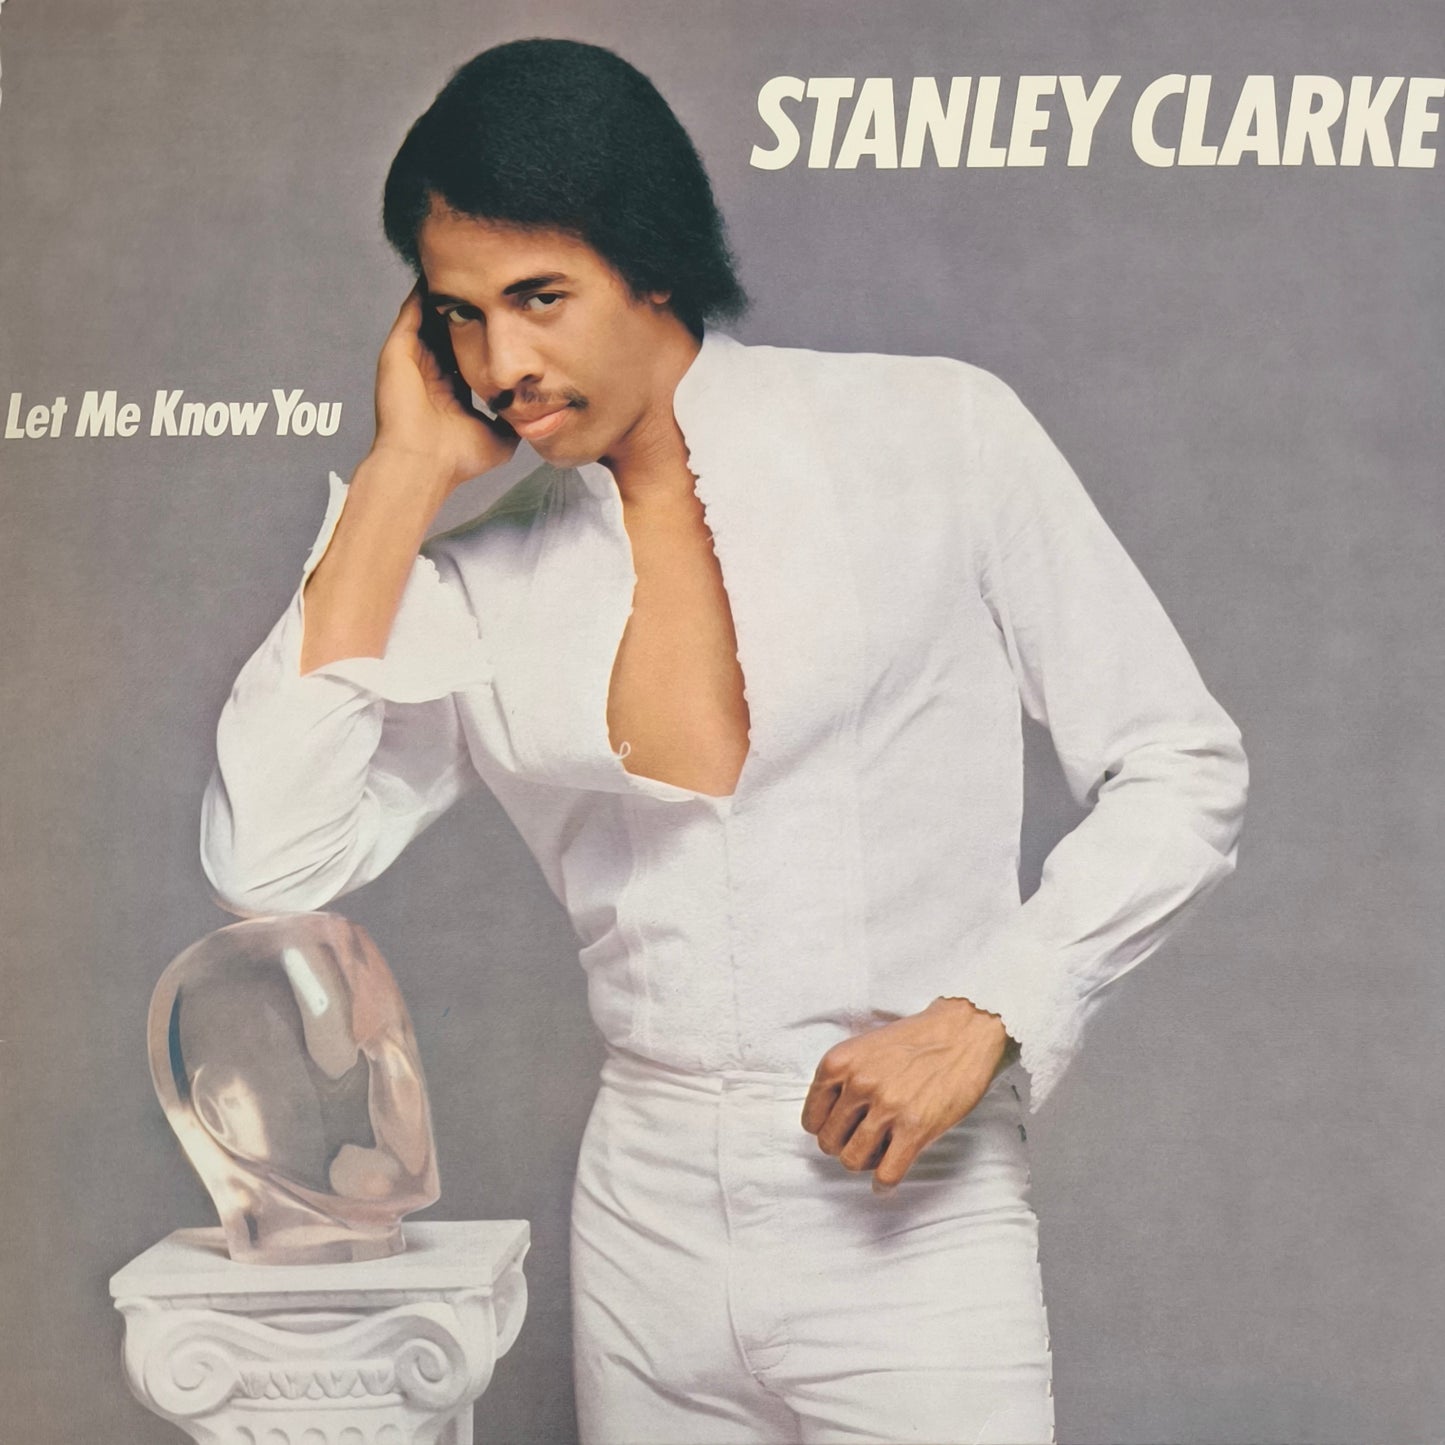 STANLEY CLARKE - Let me Know you